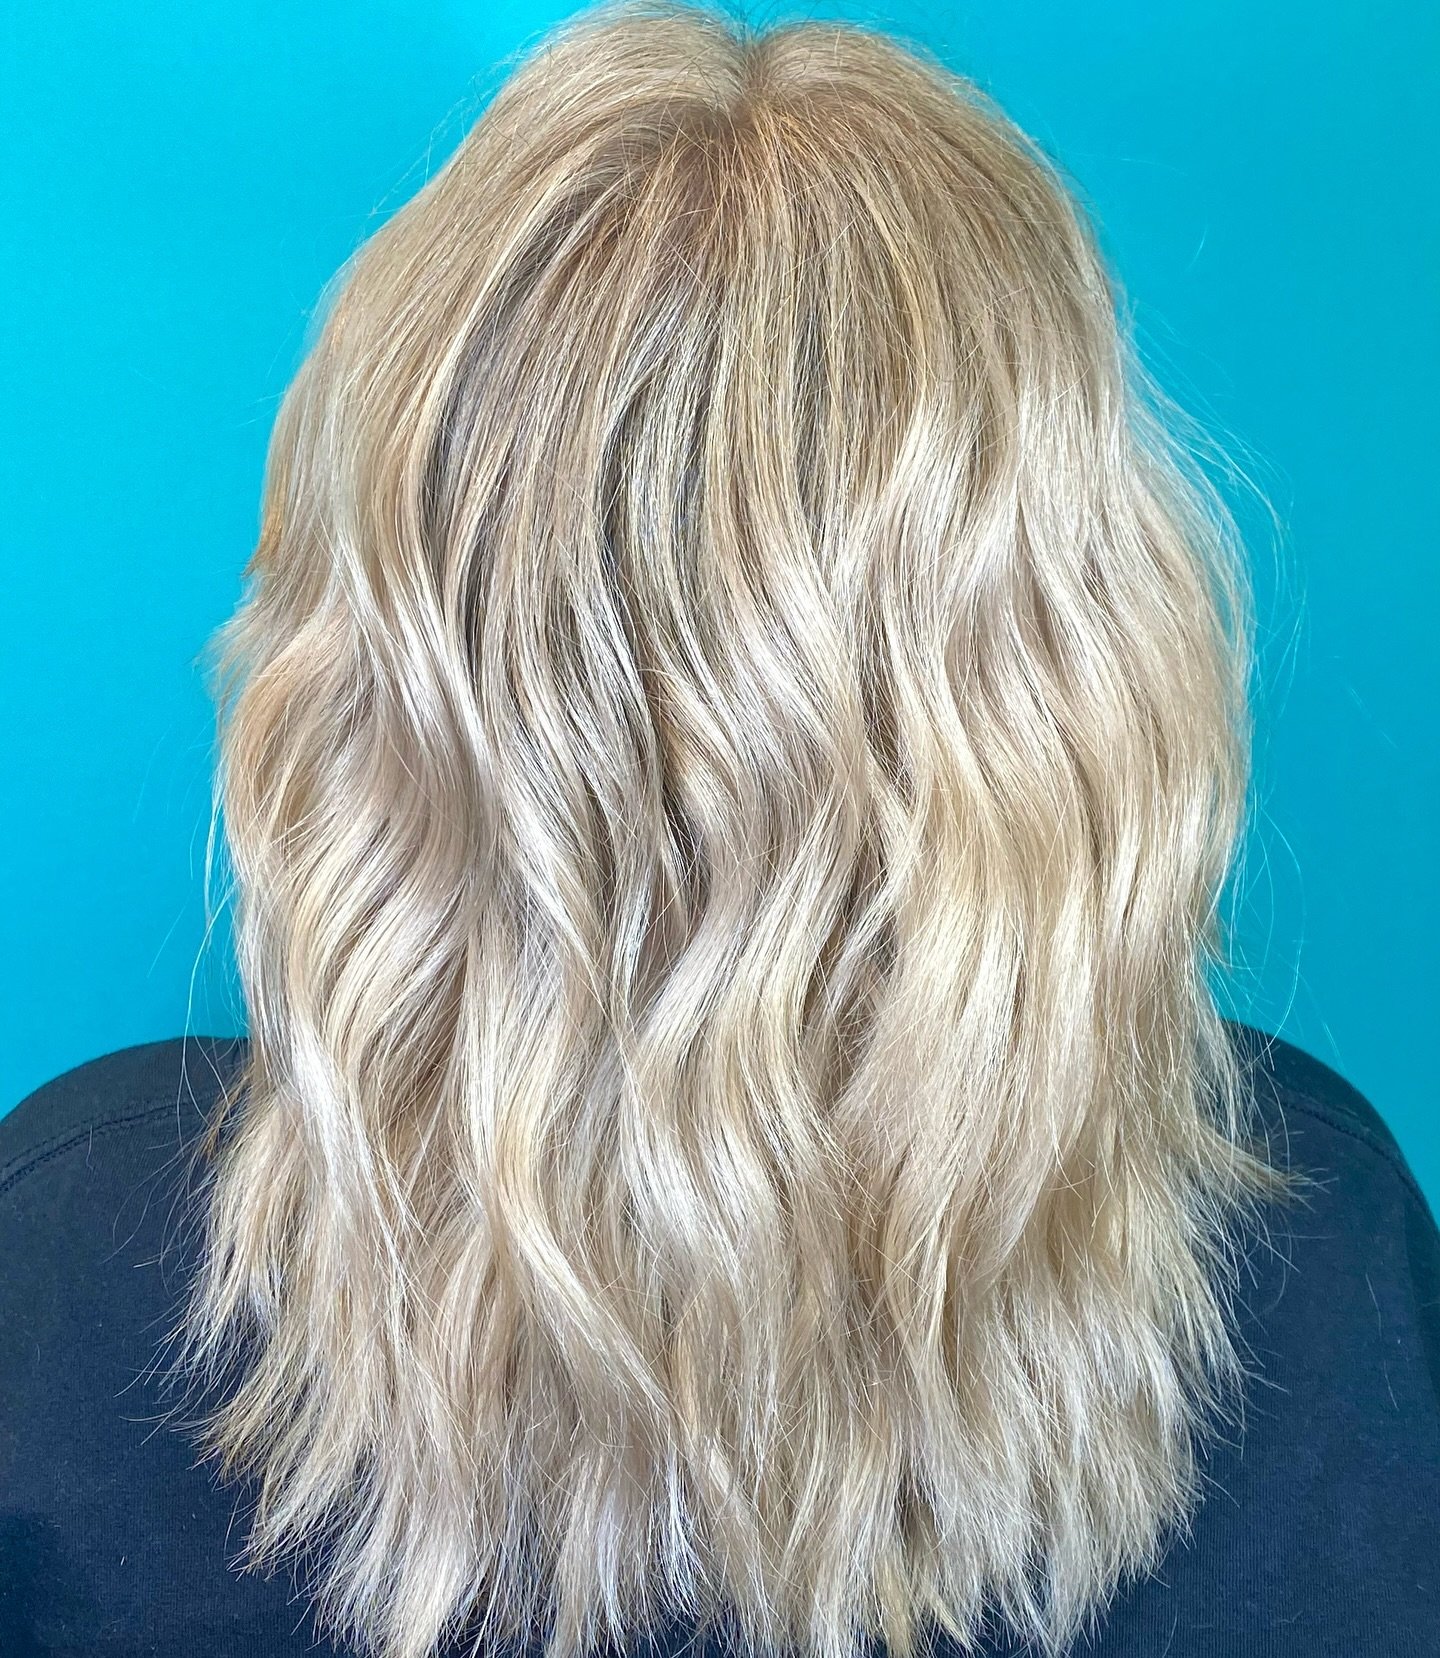 It&rsquo;s a beautiful day! Here&rsquo;s some beautiful highlighted hair and shaggy layers for the lovely @savxbenifield 🤘🏻🖤🤘🏻🖤🤘🏻

#sharethelex #kentuckykicksass #kentuckysmallbusiness #kentuckyproud #kentuckyhairstylist #kentuckyhair #lexing